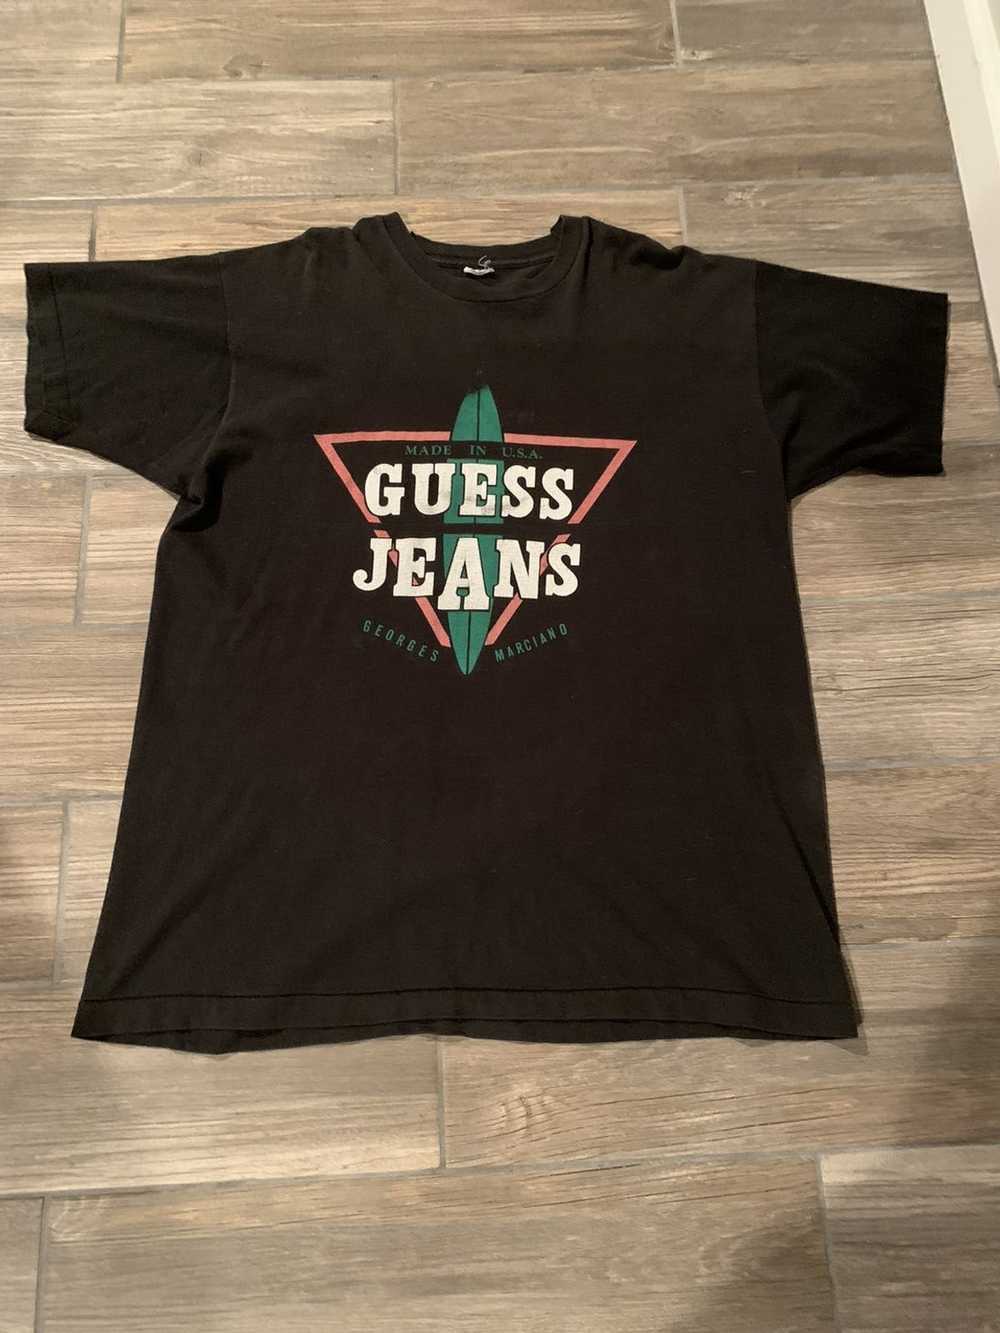 Guess Guess jeans tee - image 1